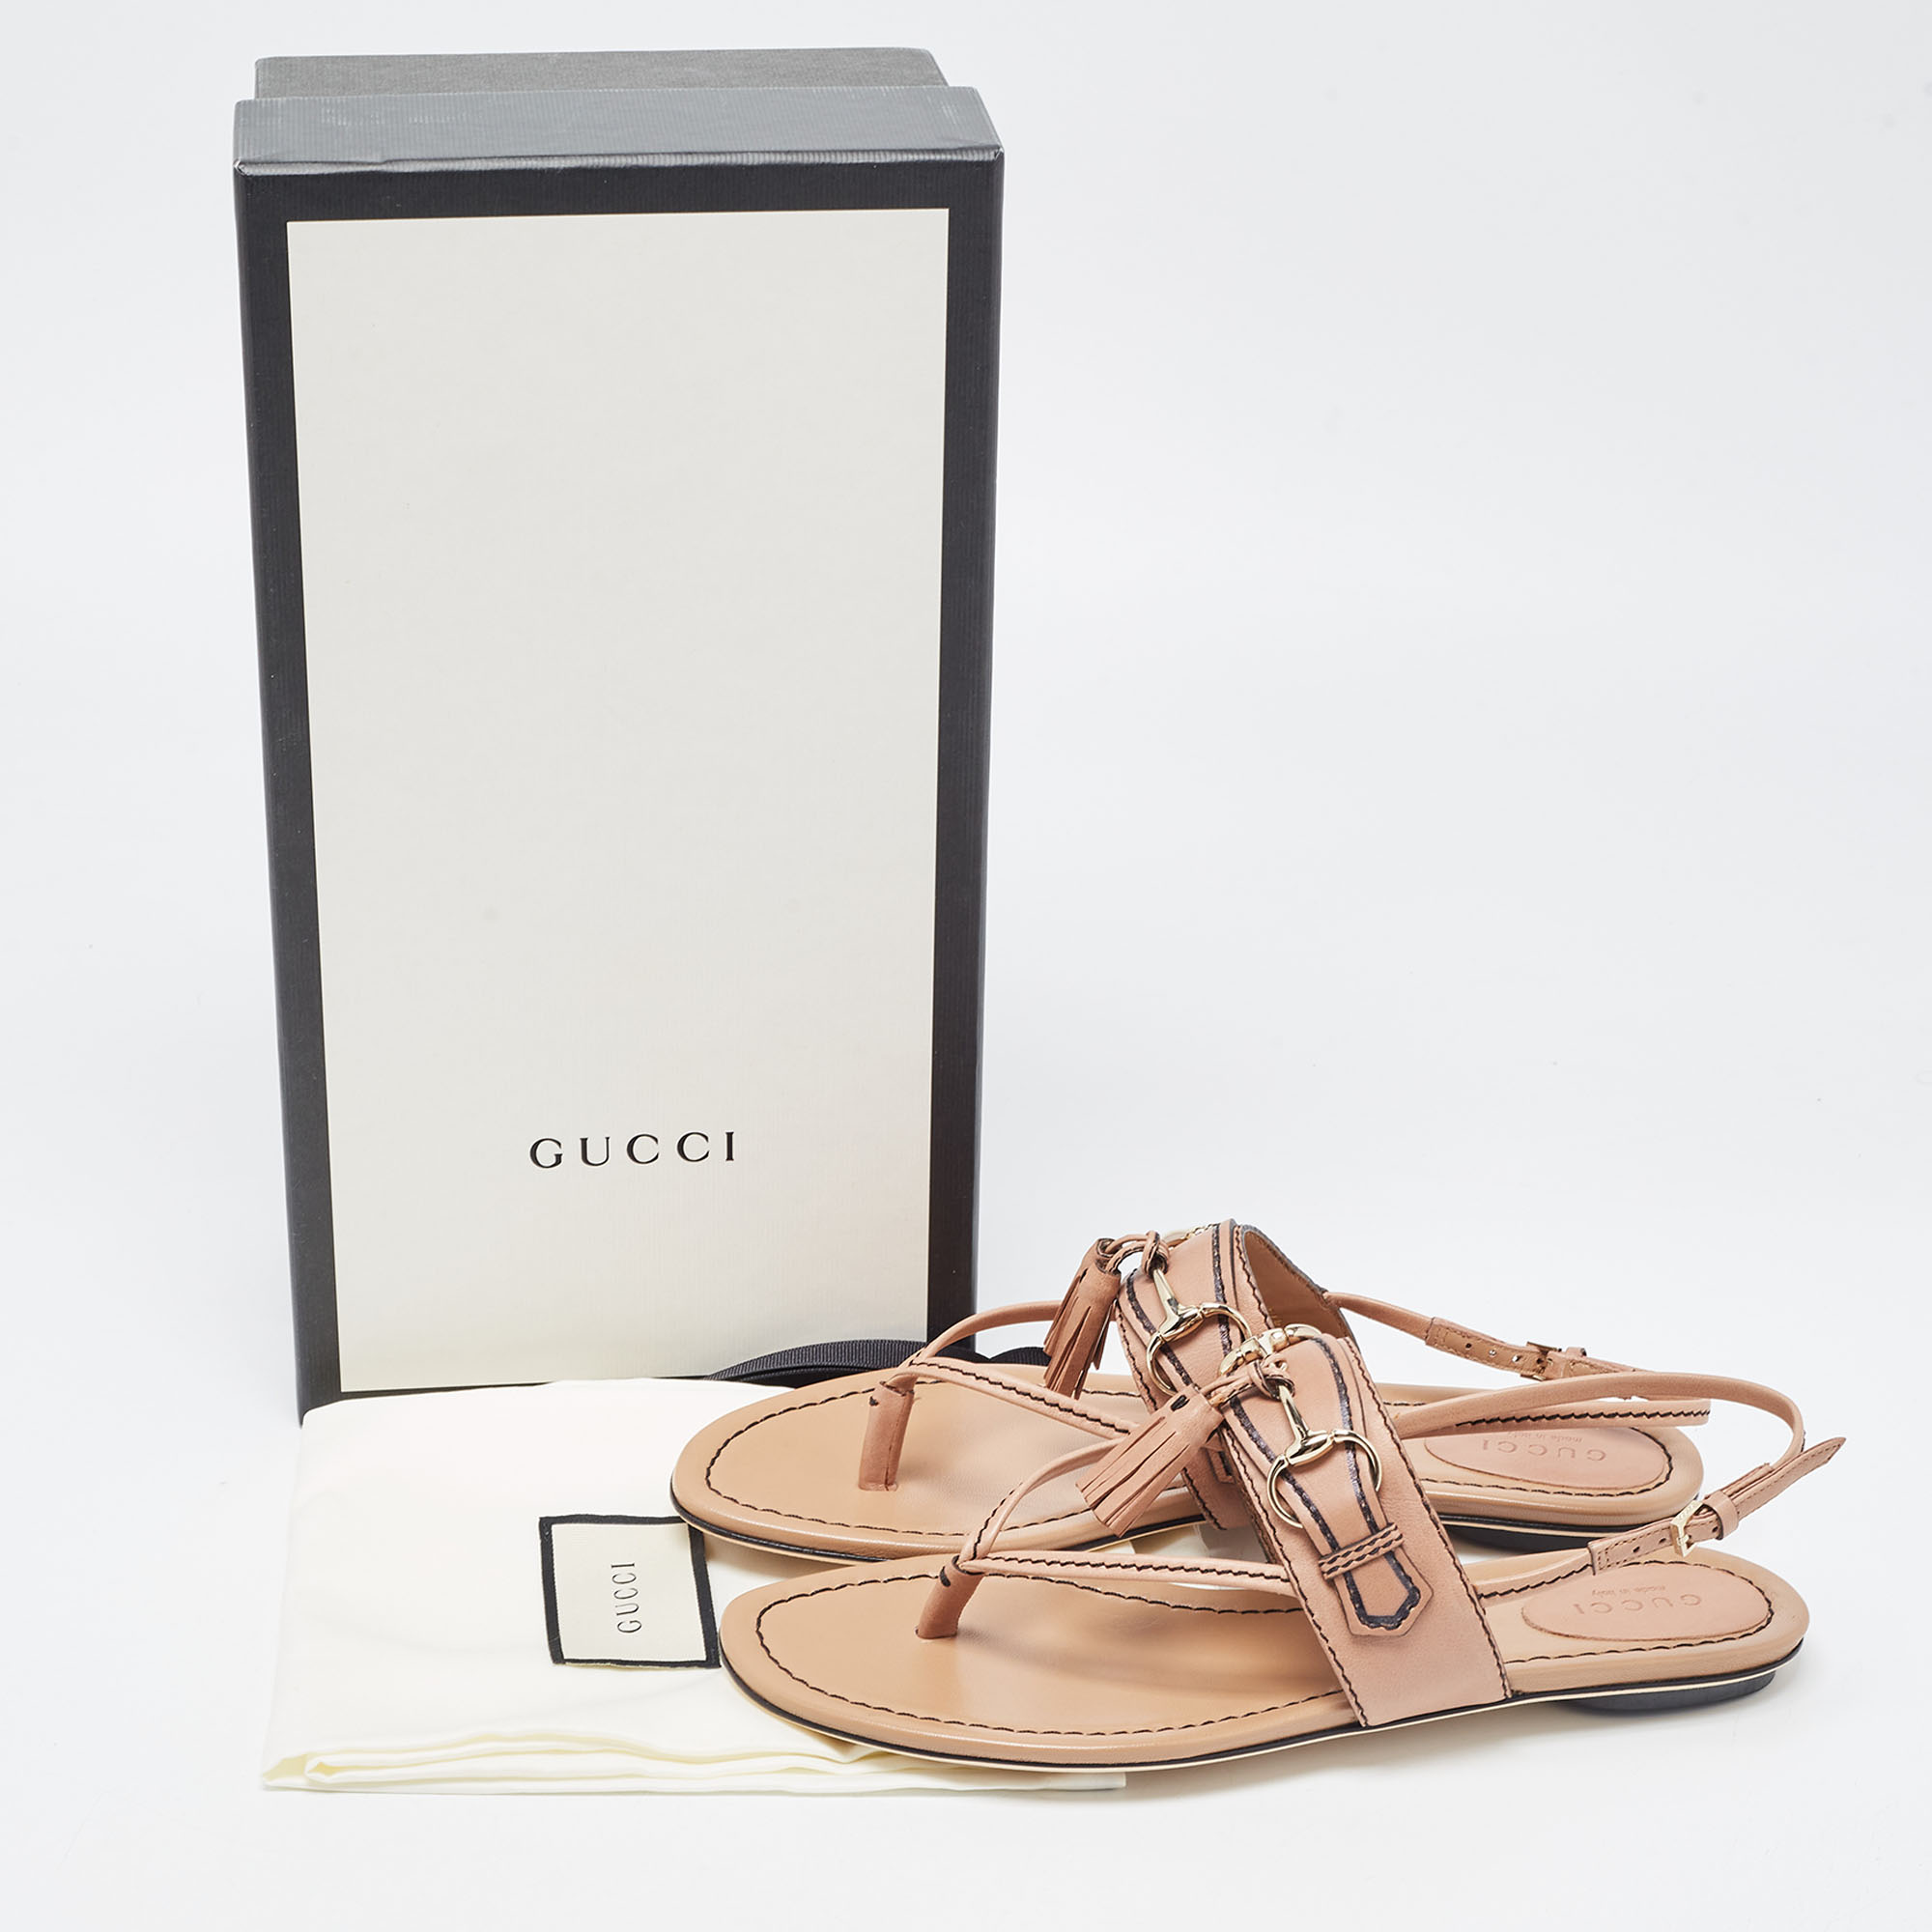 Gucci Brown Leather T-Strap Flat Sandals Size 37.5